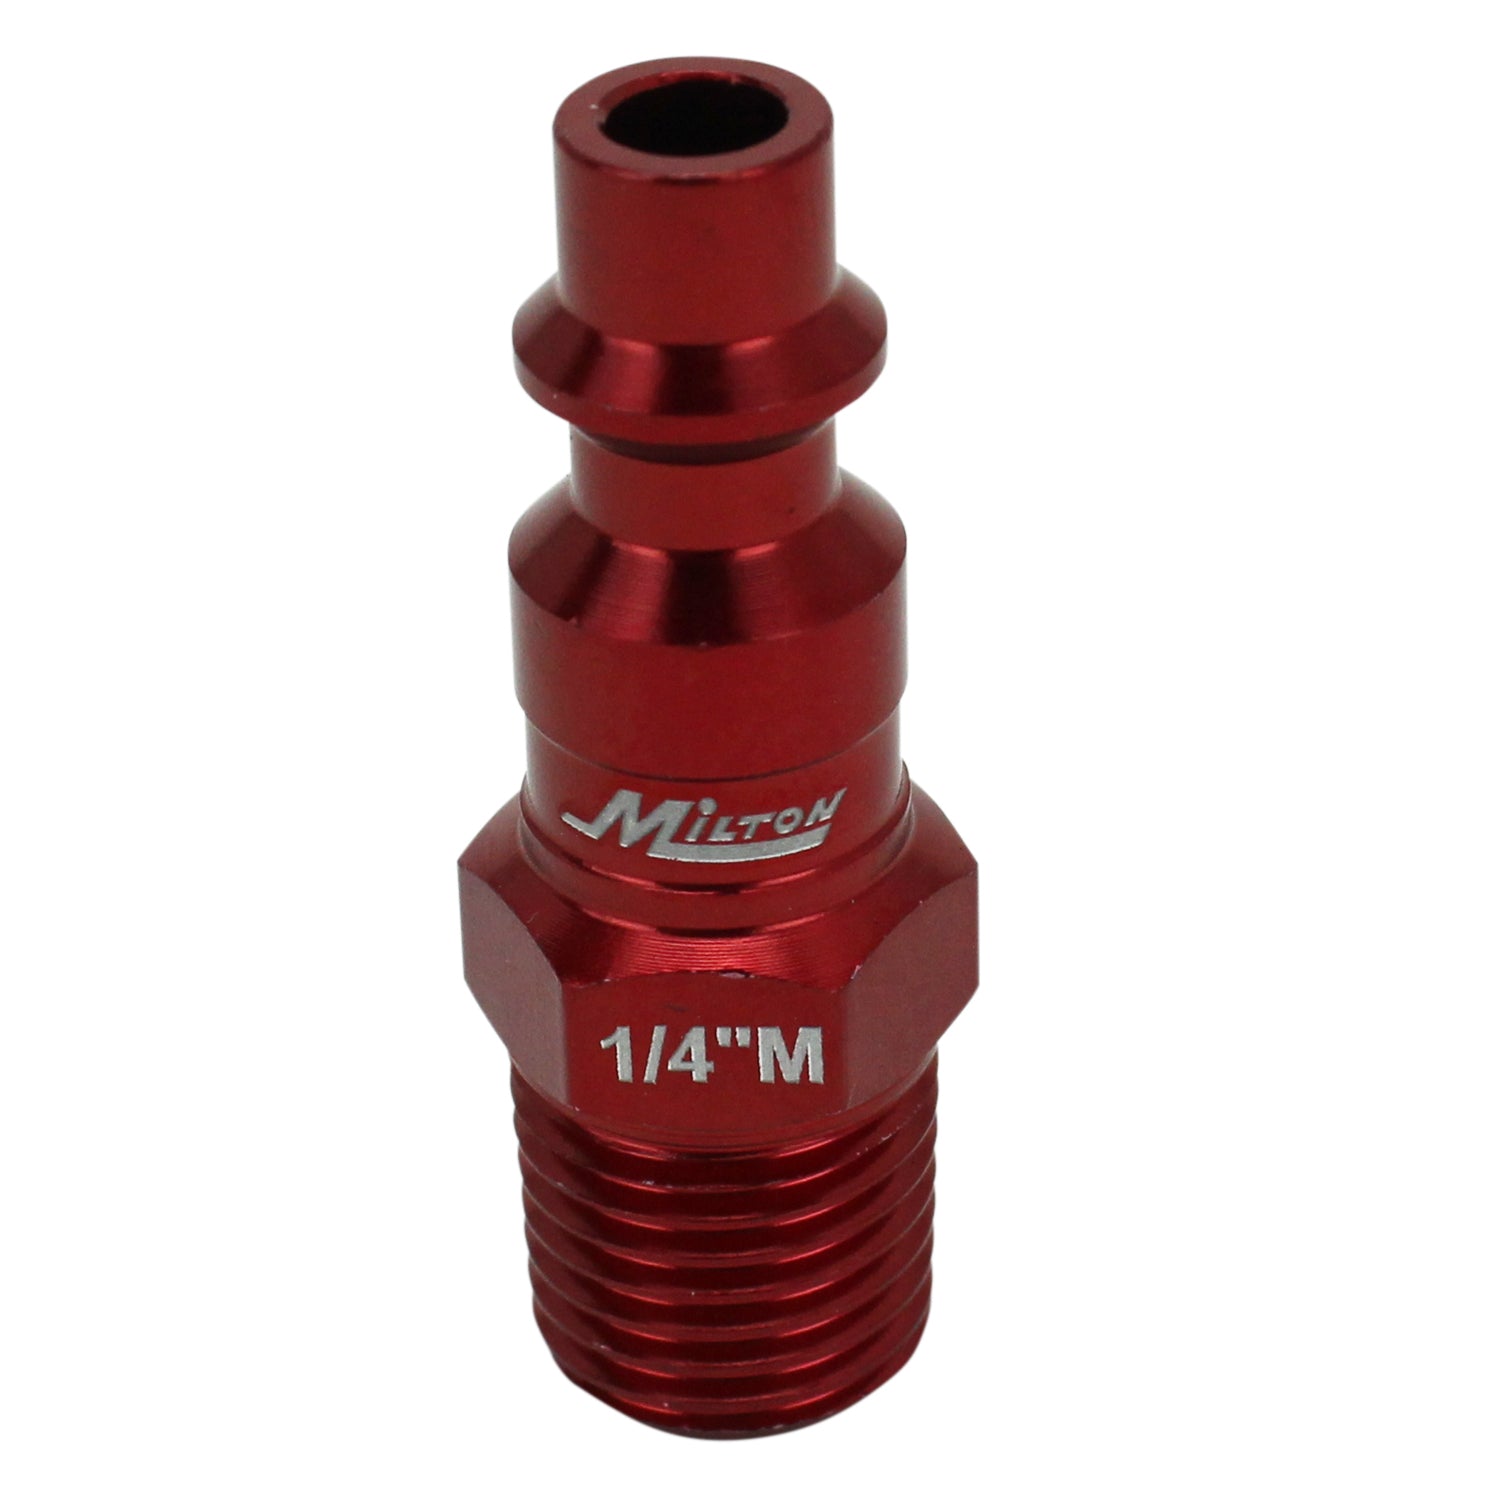 COLORFIT® M-STYLE® Coupler & Plug Kit - (M-STYLE®, Red) - 1/4